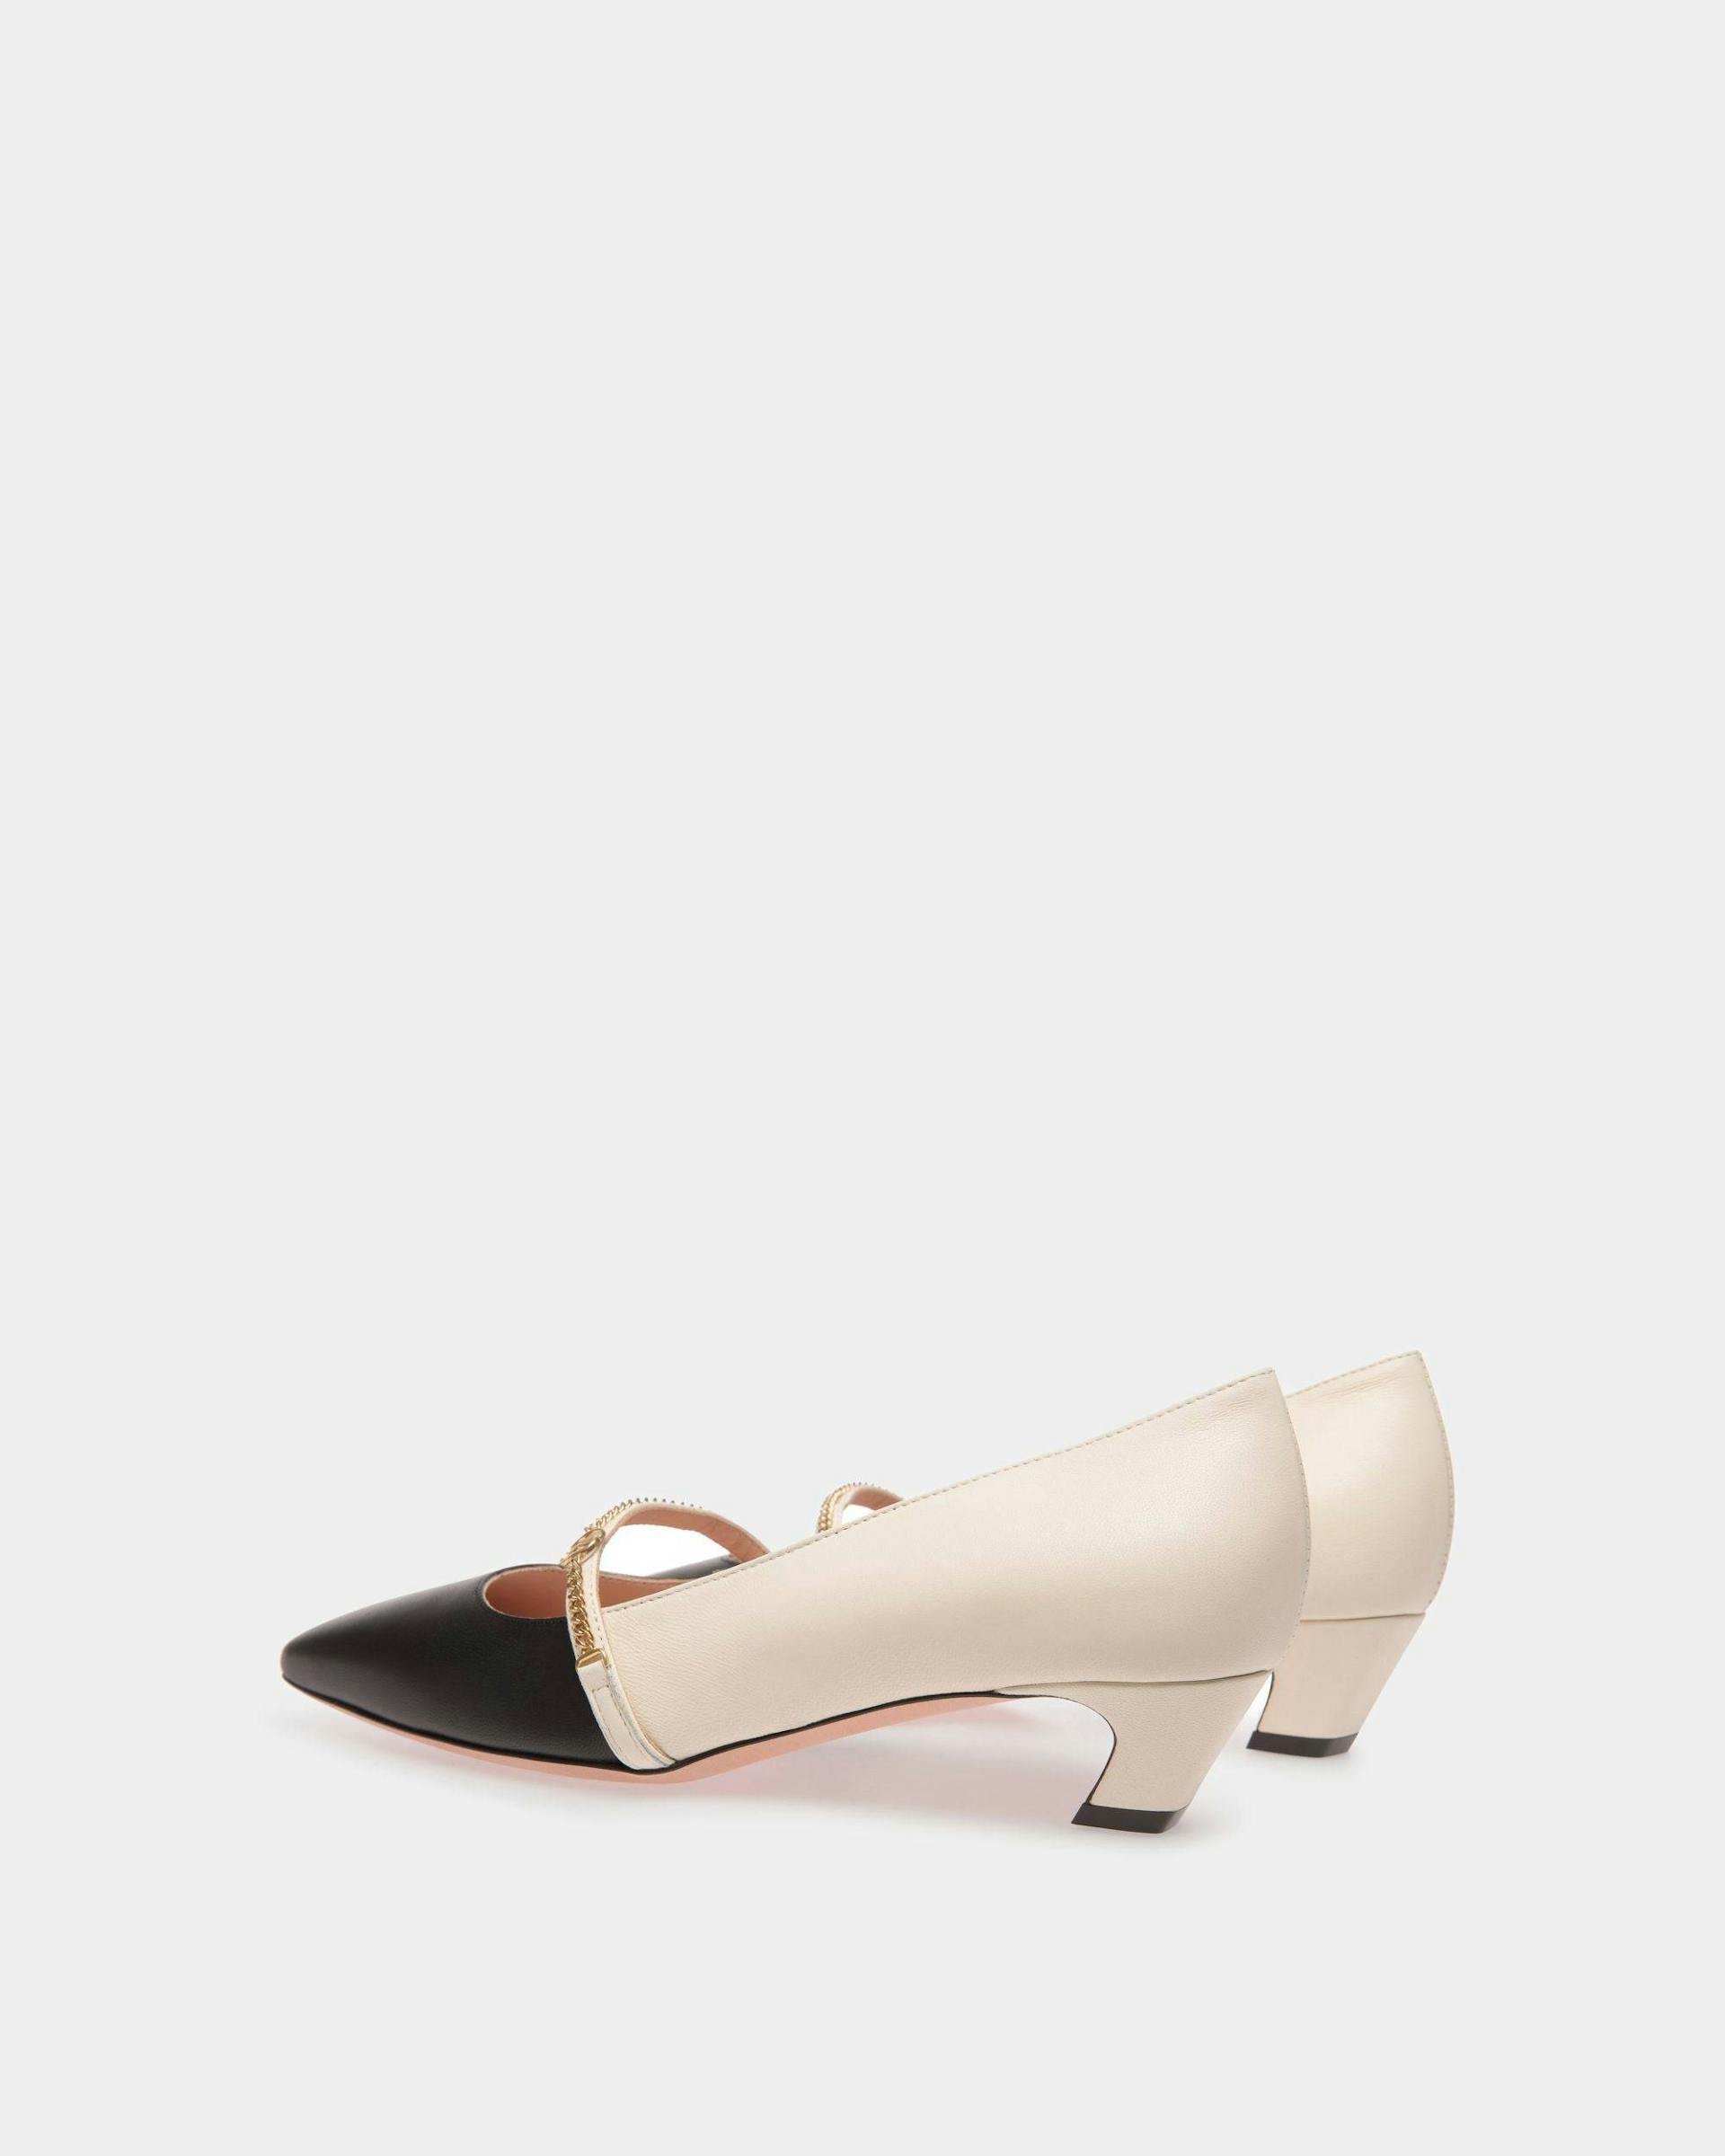 Women's Sylt Mary-Jane Pump In Black And White Leather | Bally | Still Life 3/4 Back